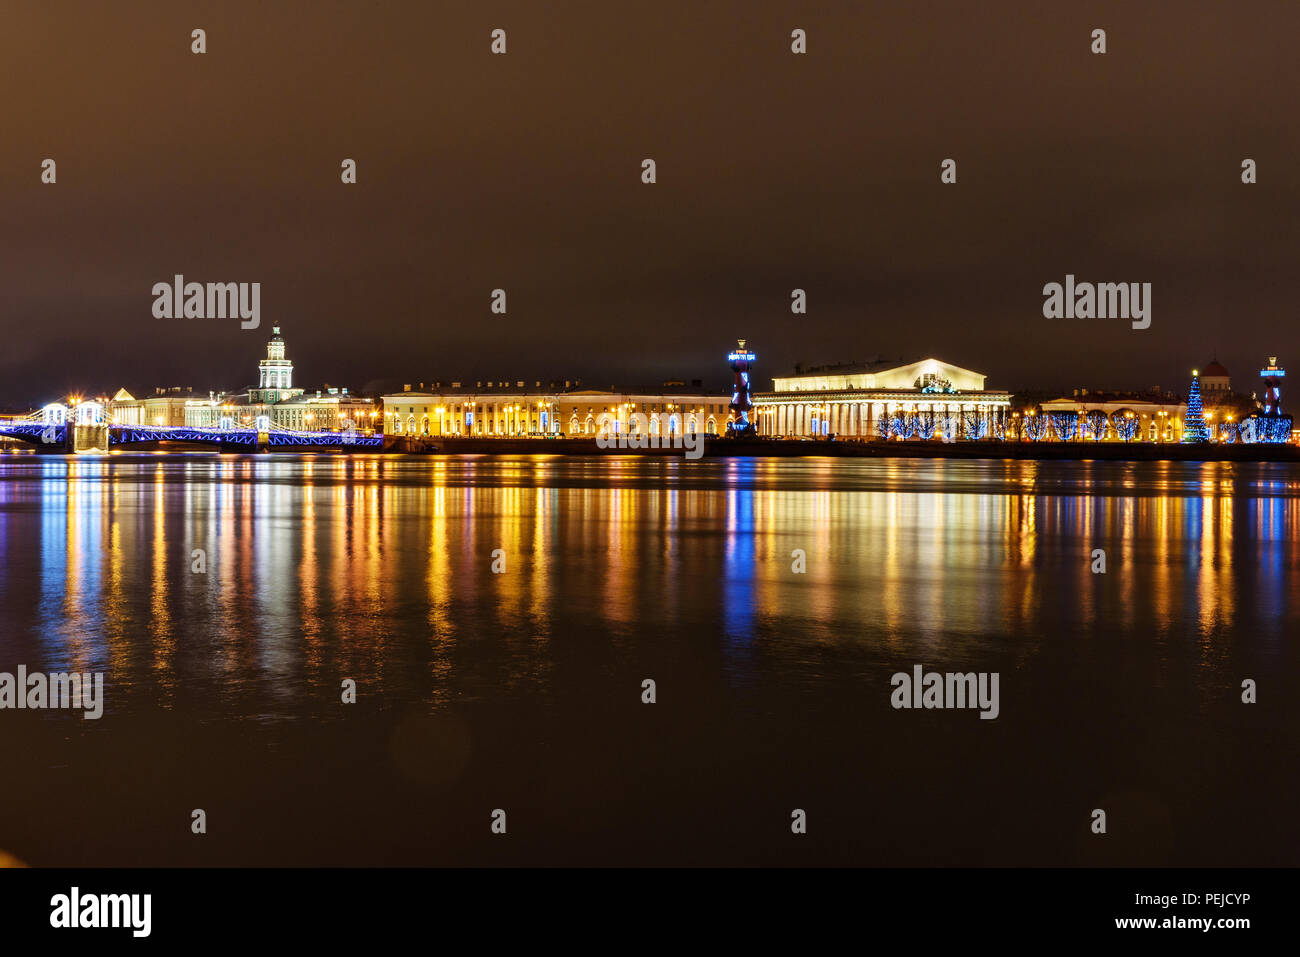 Palace Bridge and Vasilyevsky island Spit Strelka with Rostral columns at night. New Year and Christmas illumunated. Saint Petersburg, Russia Stock Photo